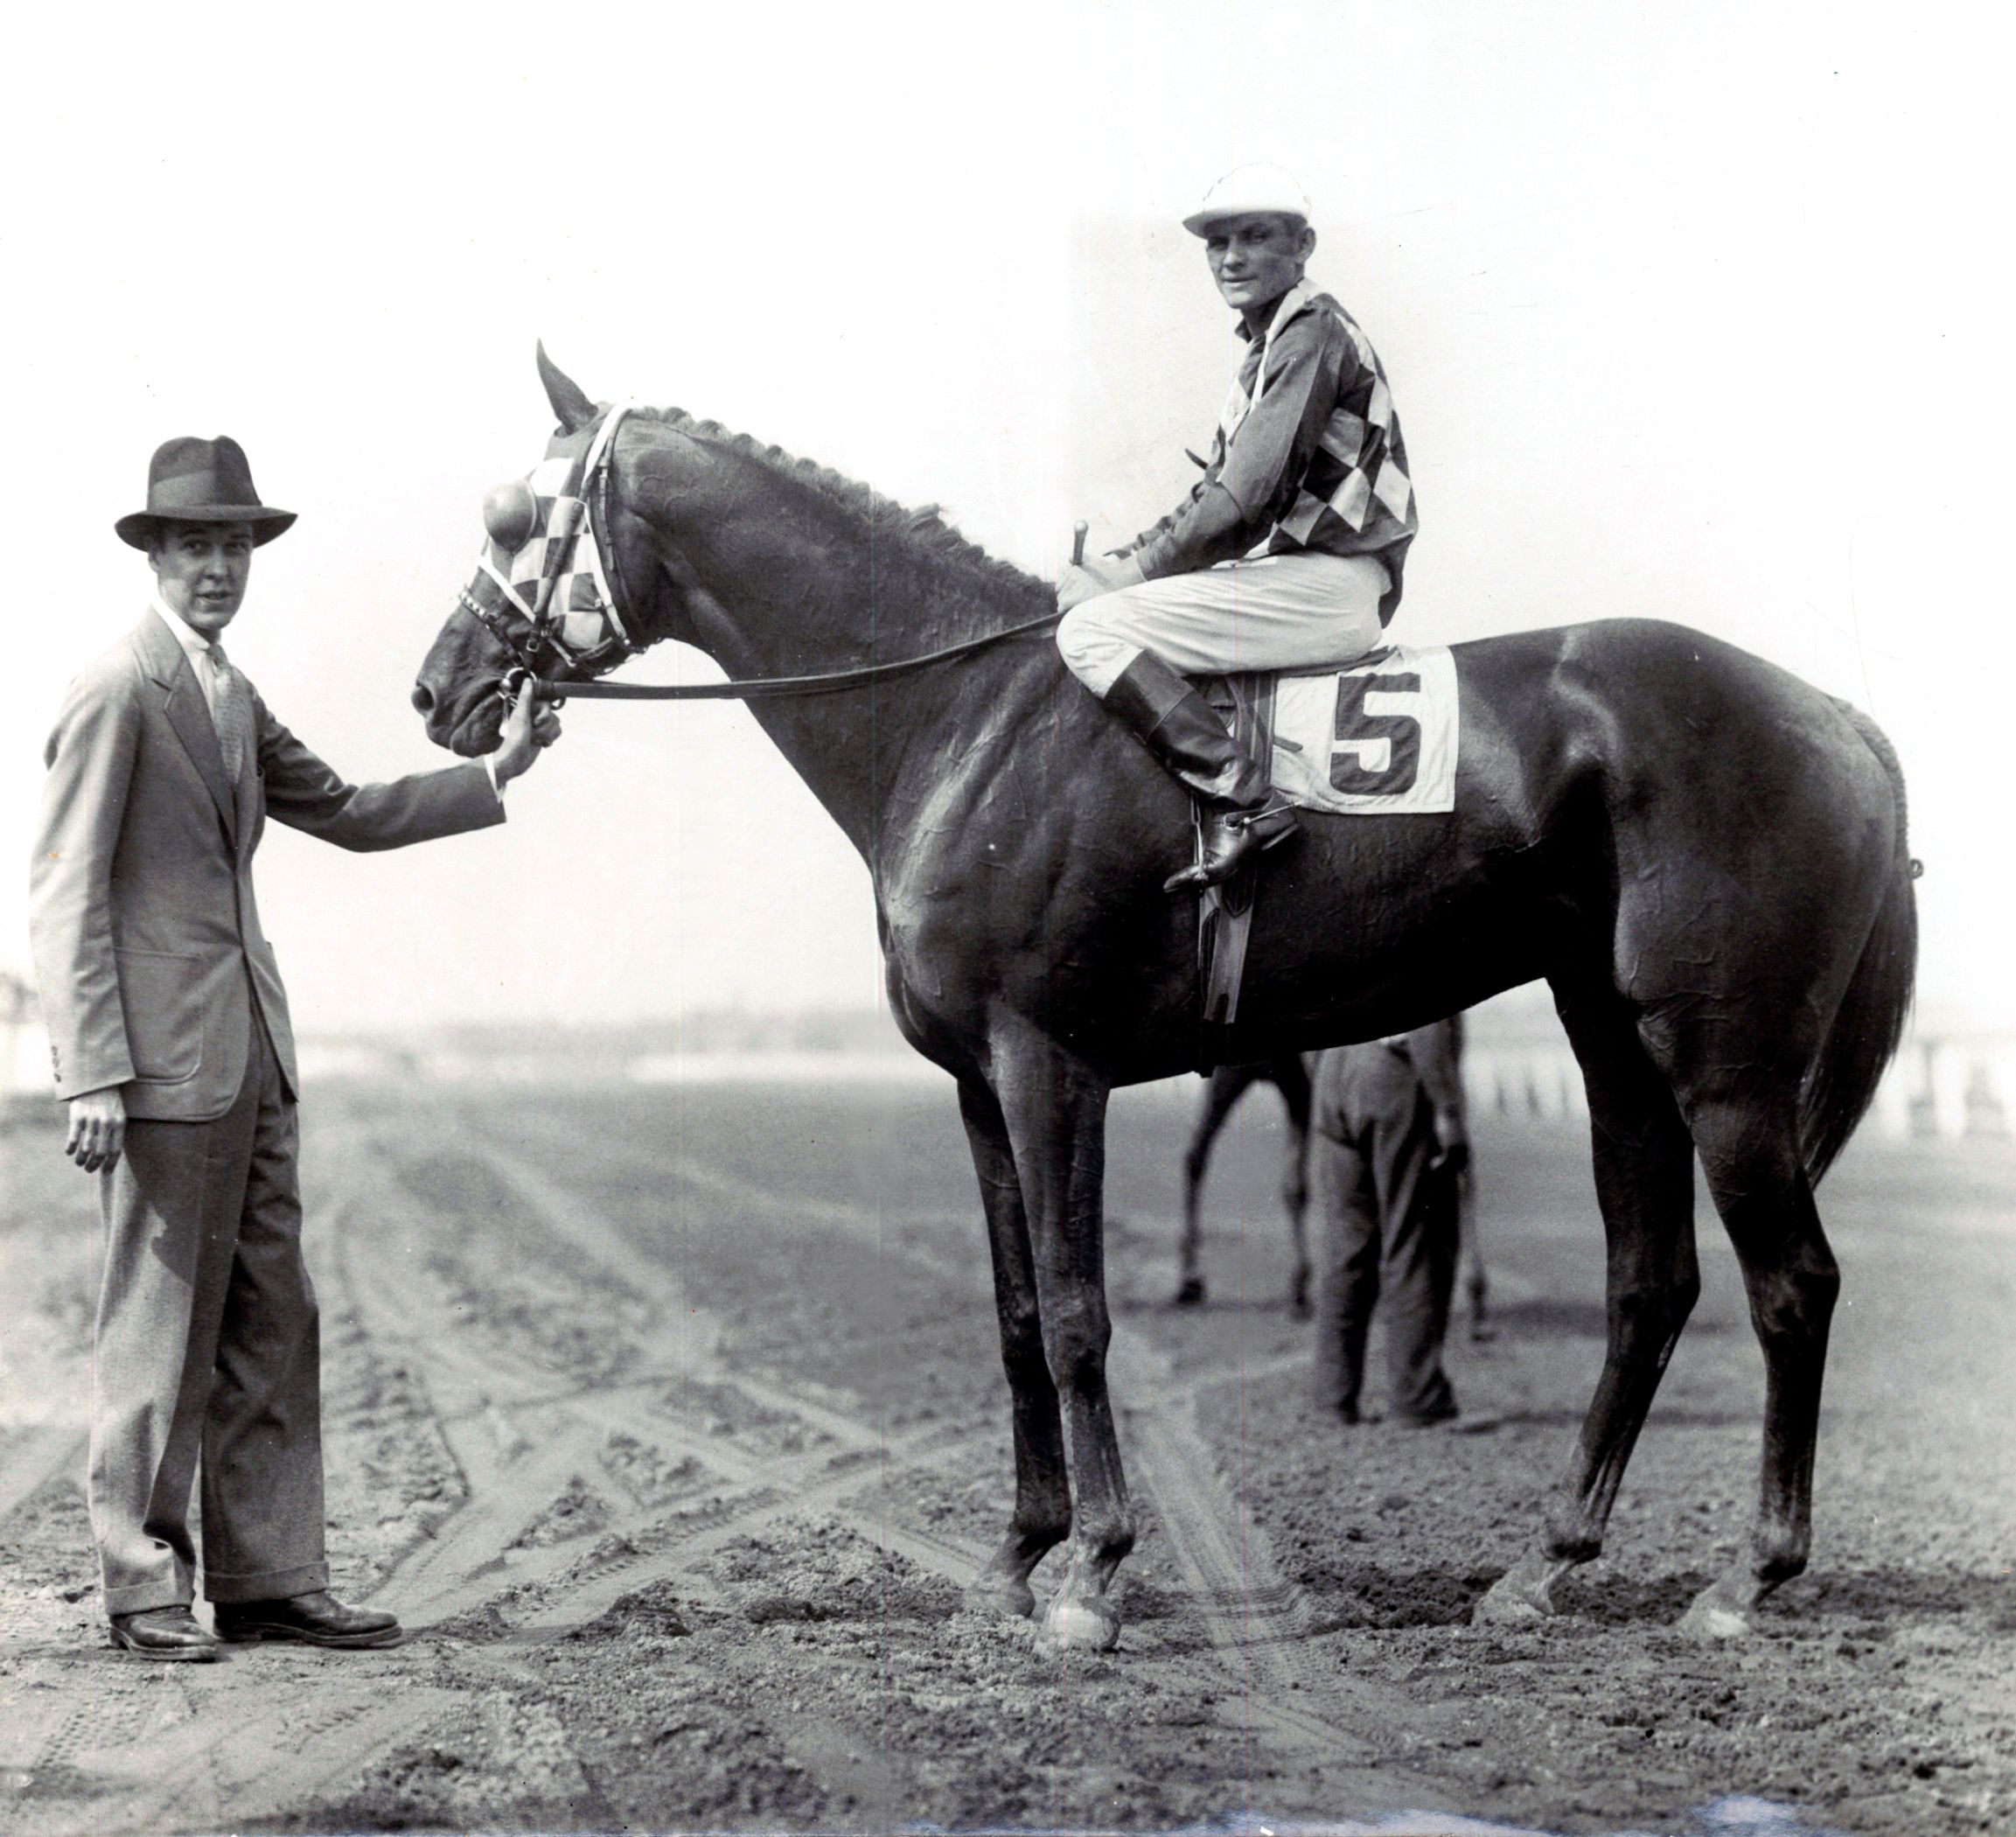 Discovery in the winner's circle at Aqueduct with owner Alfred G. Vanderbilt on June 28, 1934 (C.C. Cook/Museum Collection)